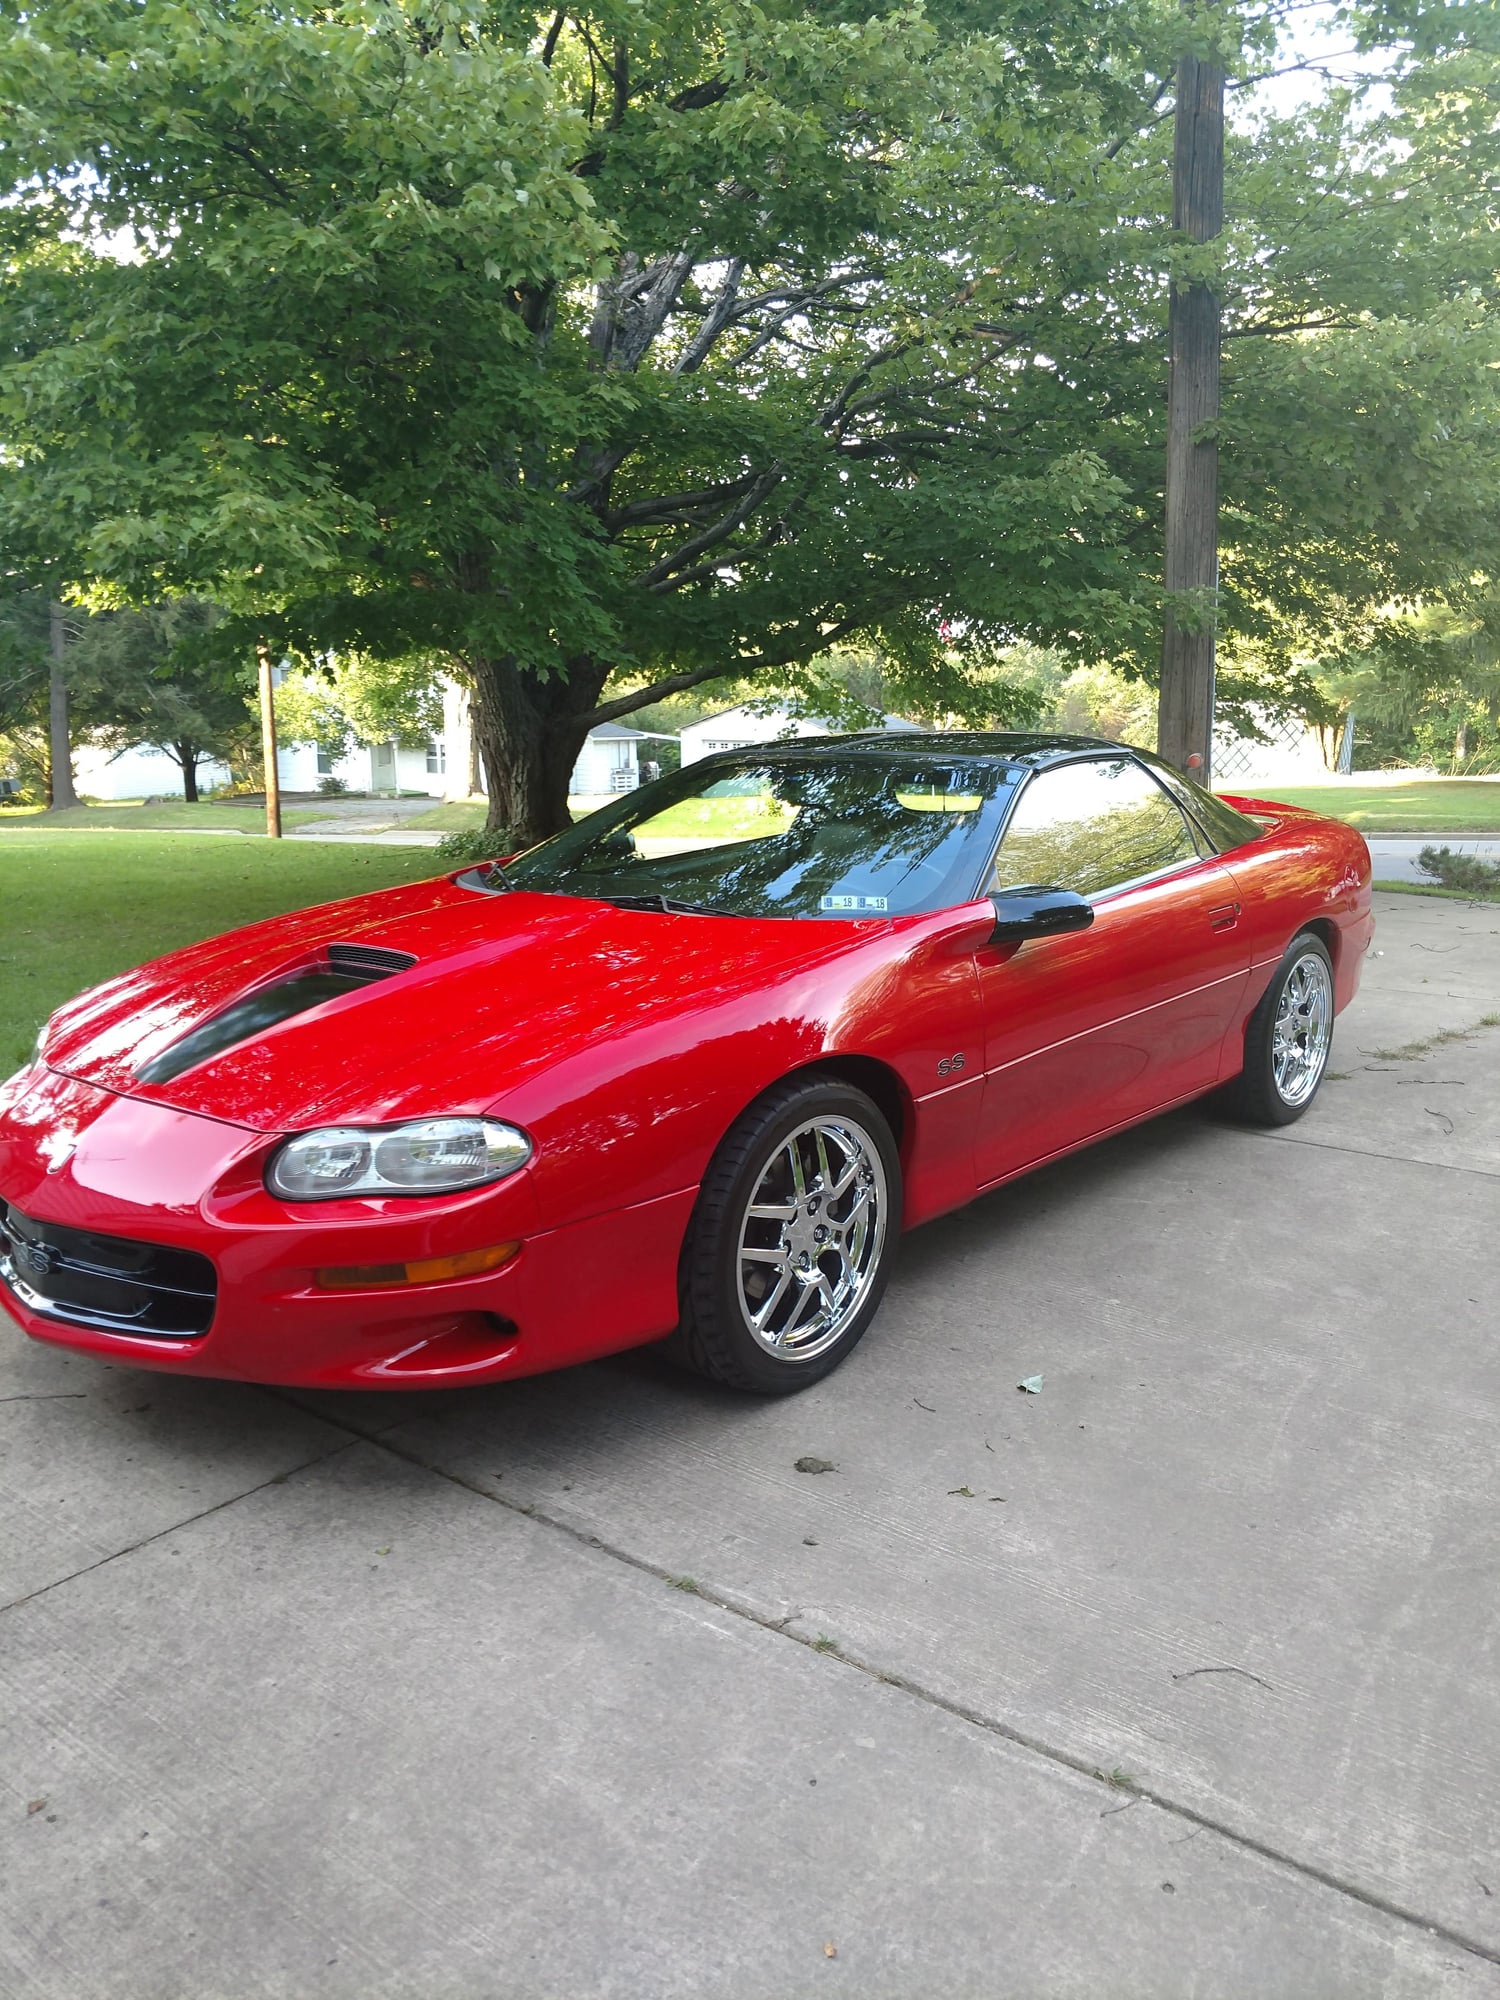 2000 Chevrolet Camaro - Selling my low mileage garage kept dust queen Camaro SS. - Used - VIN 2G1FP22G0Y2155291 - 40,133 Miles - 8 cyl - 2WD - Manual - Coupe - Red - Greenville, PA 16125, United States